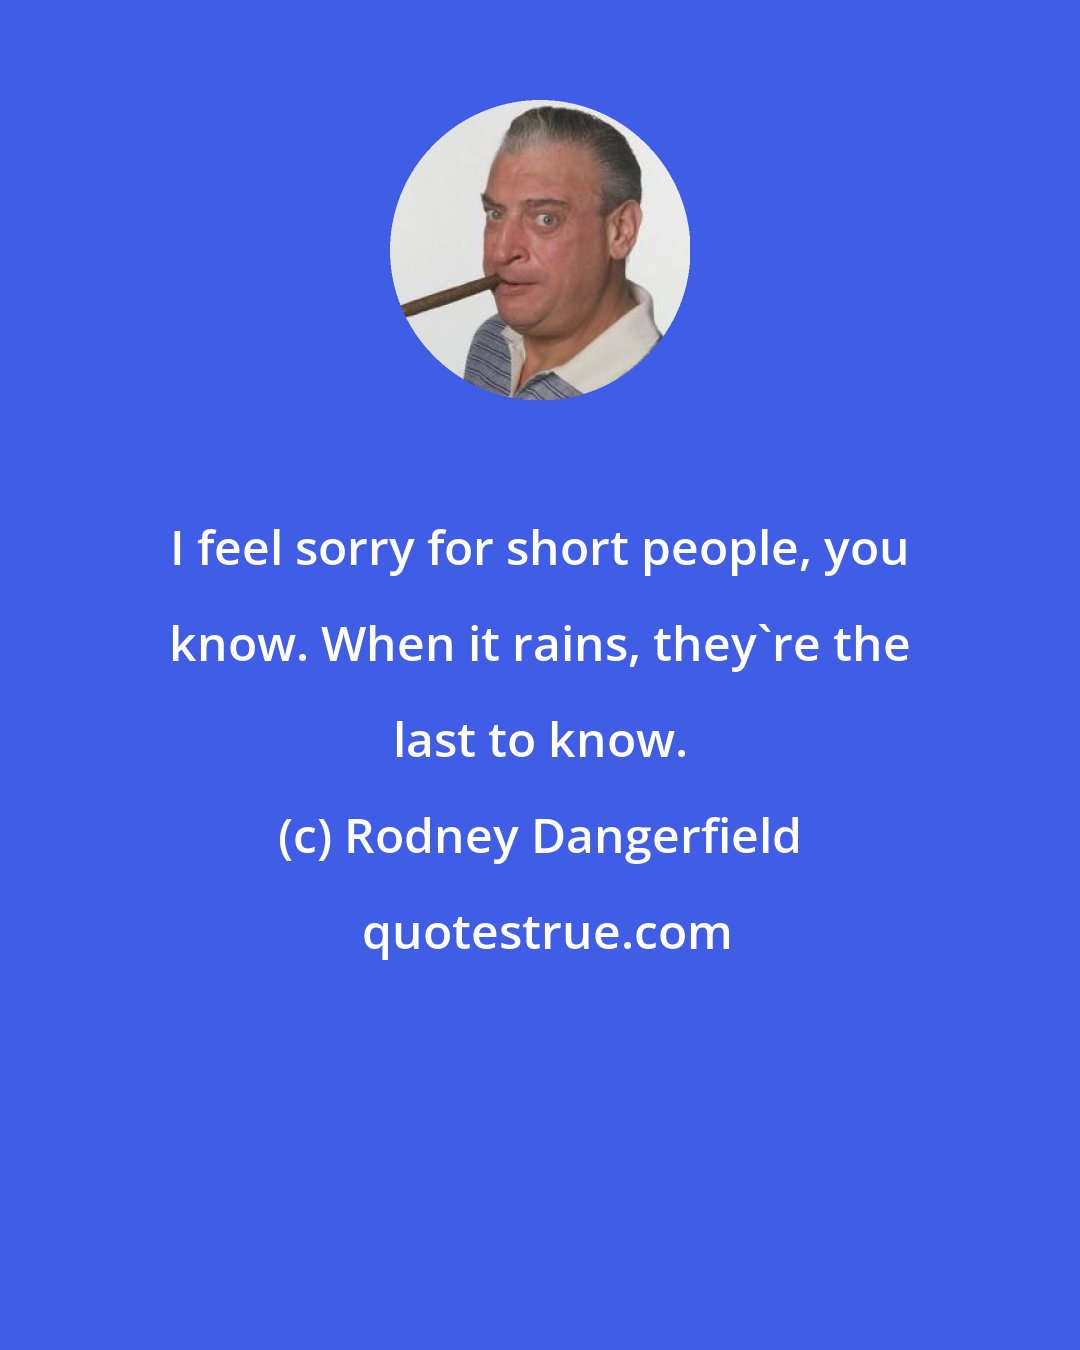 Rodney Dangerfield: I feel sorry for short people, you know. When it rains, they're the last to know.